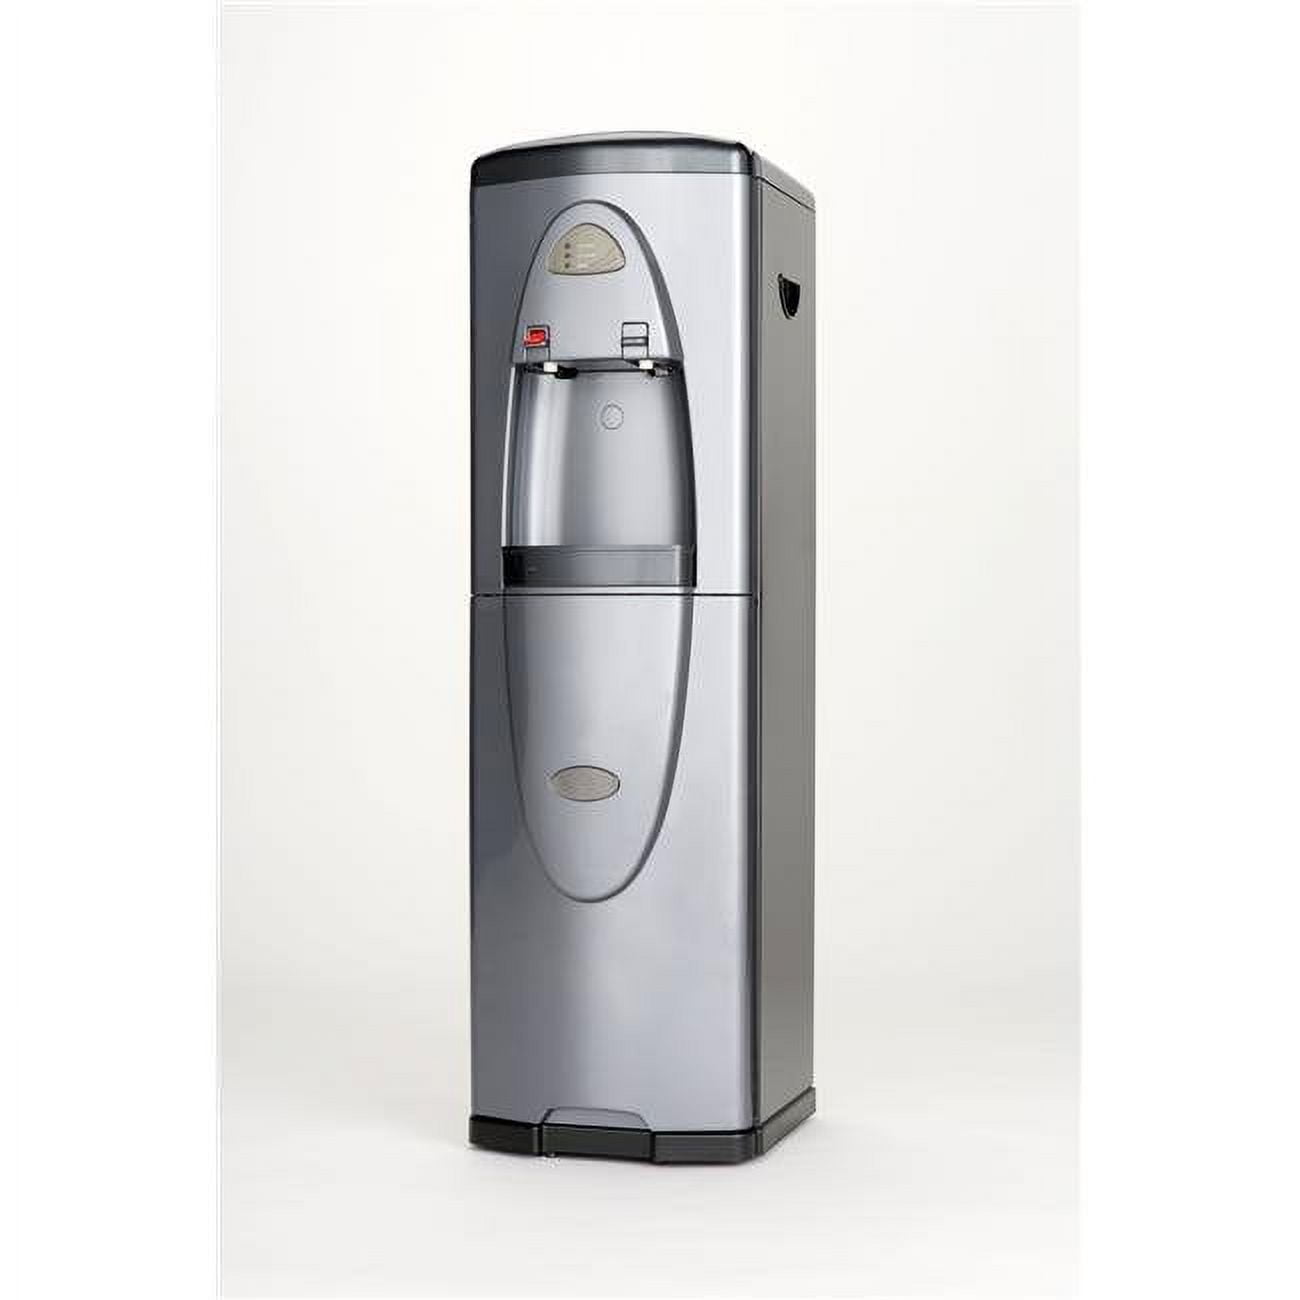 G3fuv 3-series Hot & Cold Bottleless Water Cooler With Filtration, Uv Light & Nano Filter